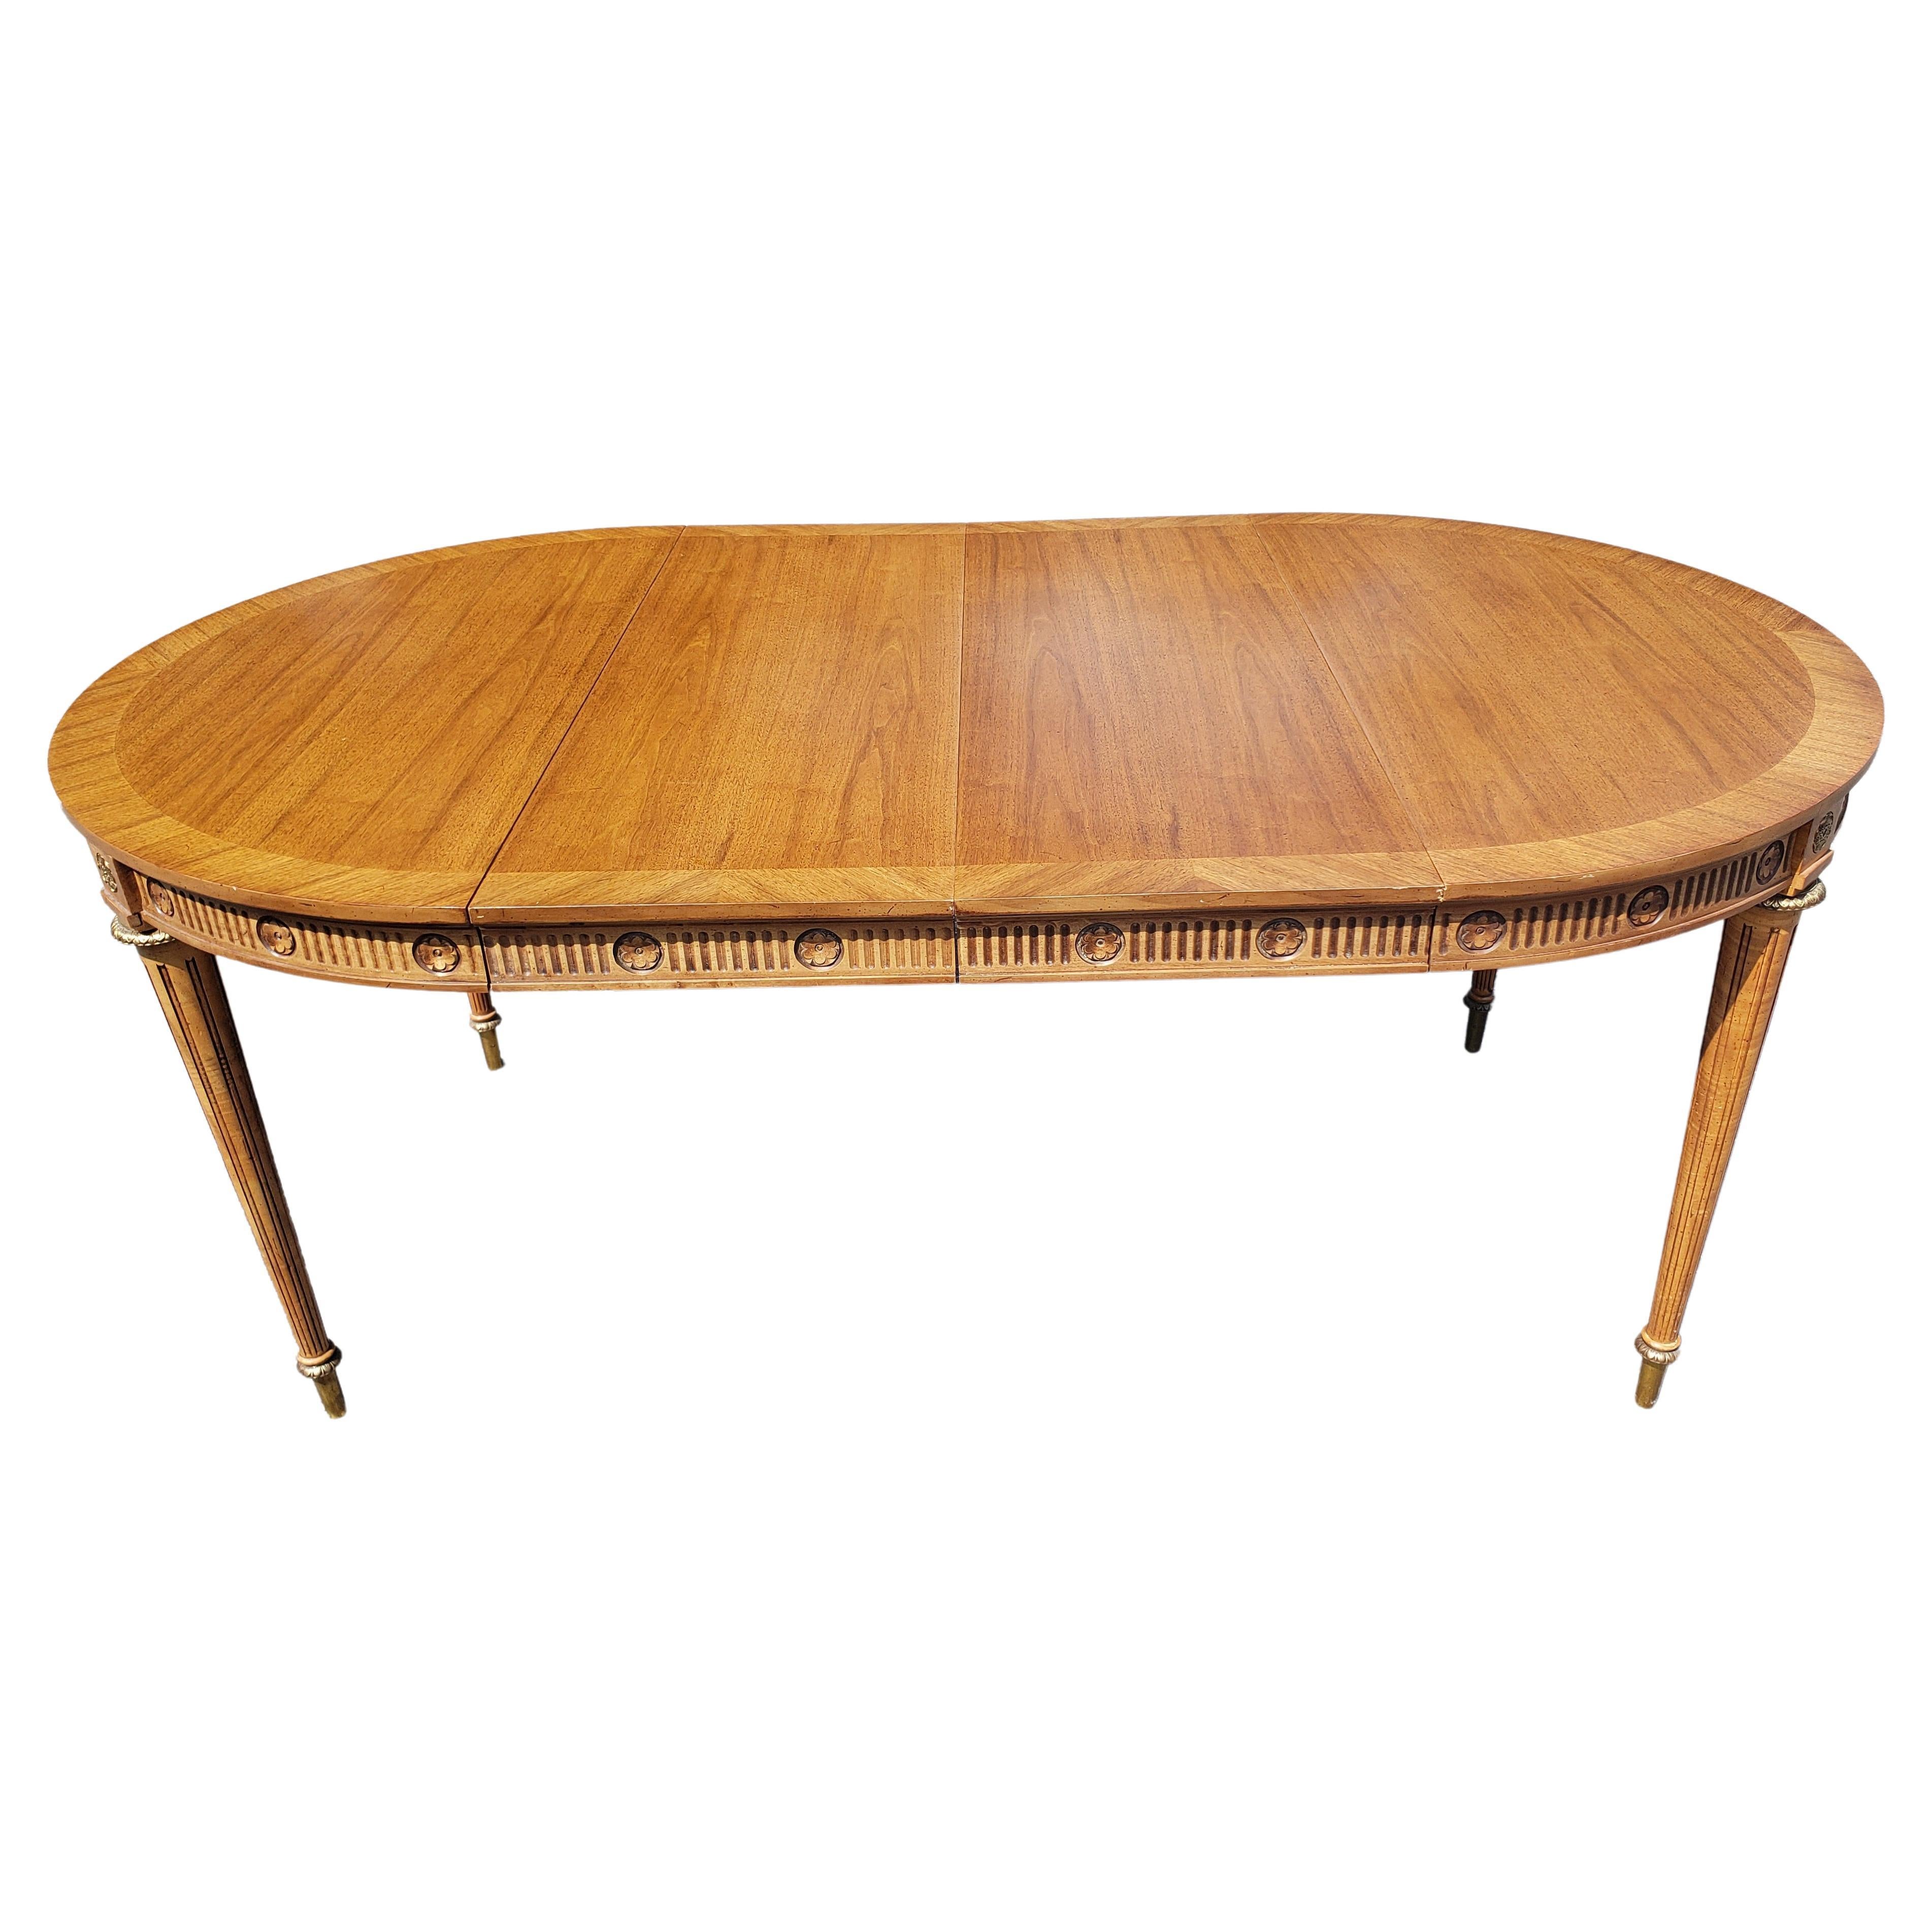 This high quality Dining Table with Two Leaves is made out of French Walnut wood,veneer and cast brass mounted ornaments. The table is made by J. L. Metz and it is labeled. Table has been recently refinished and is in great condition. It has a